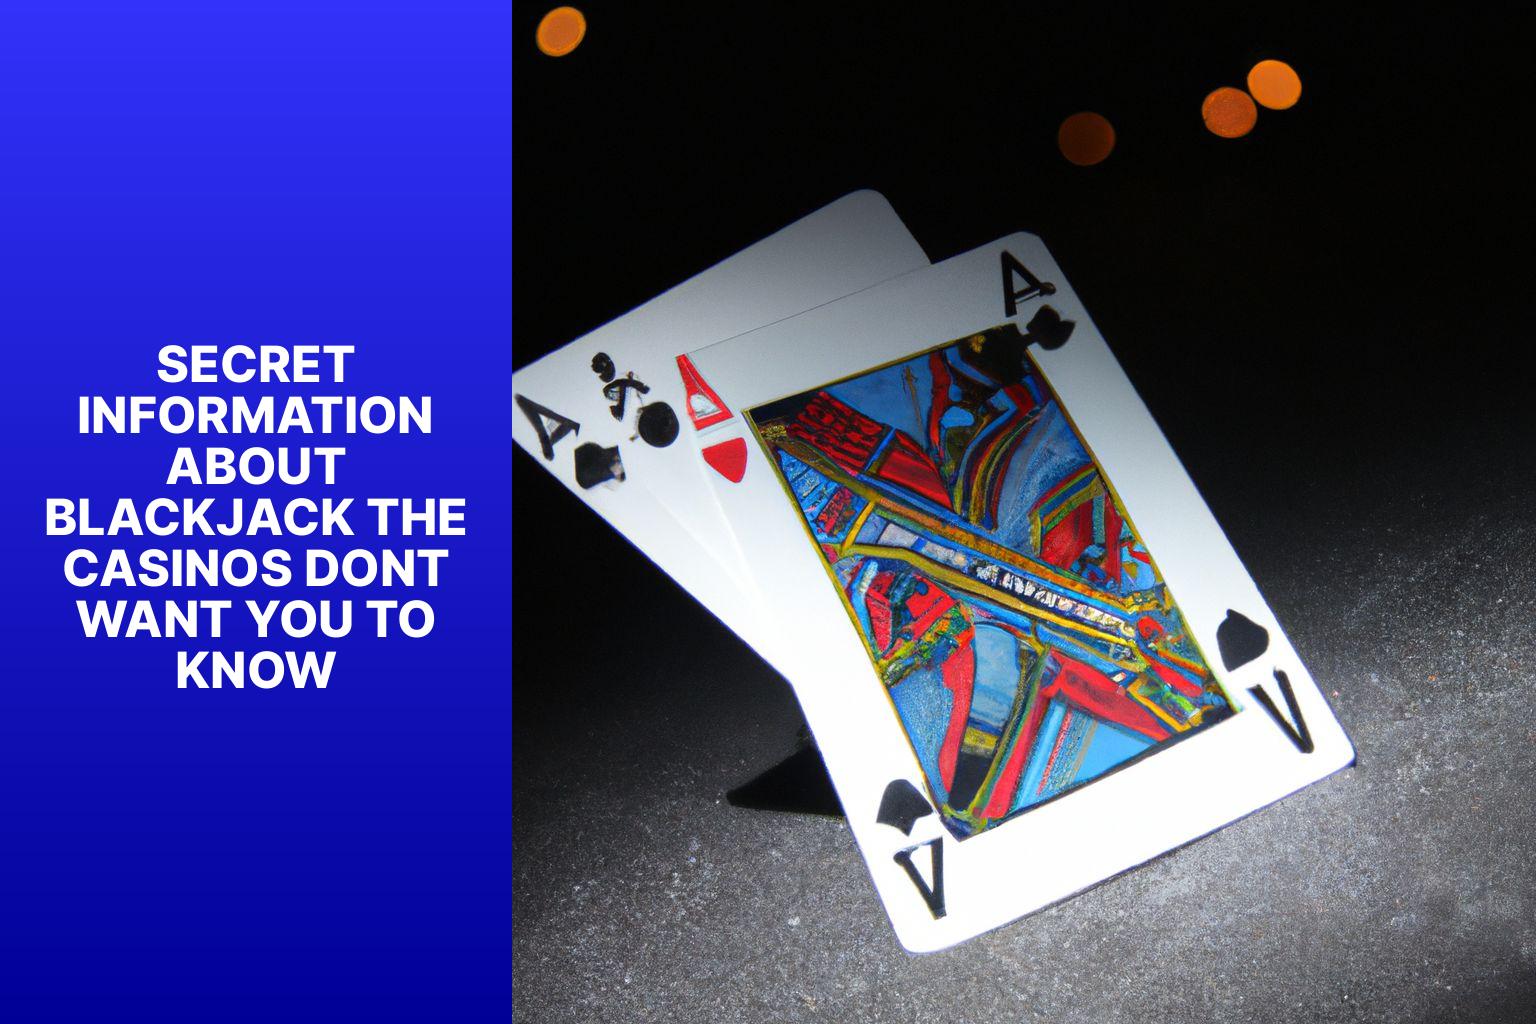 Secret Information about Blackjack the Casinos Dont Want You to Know